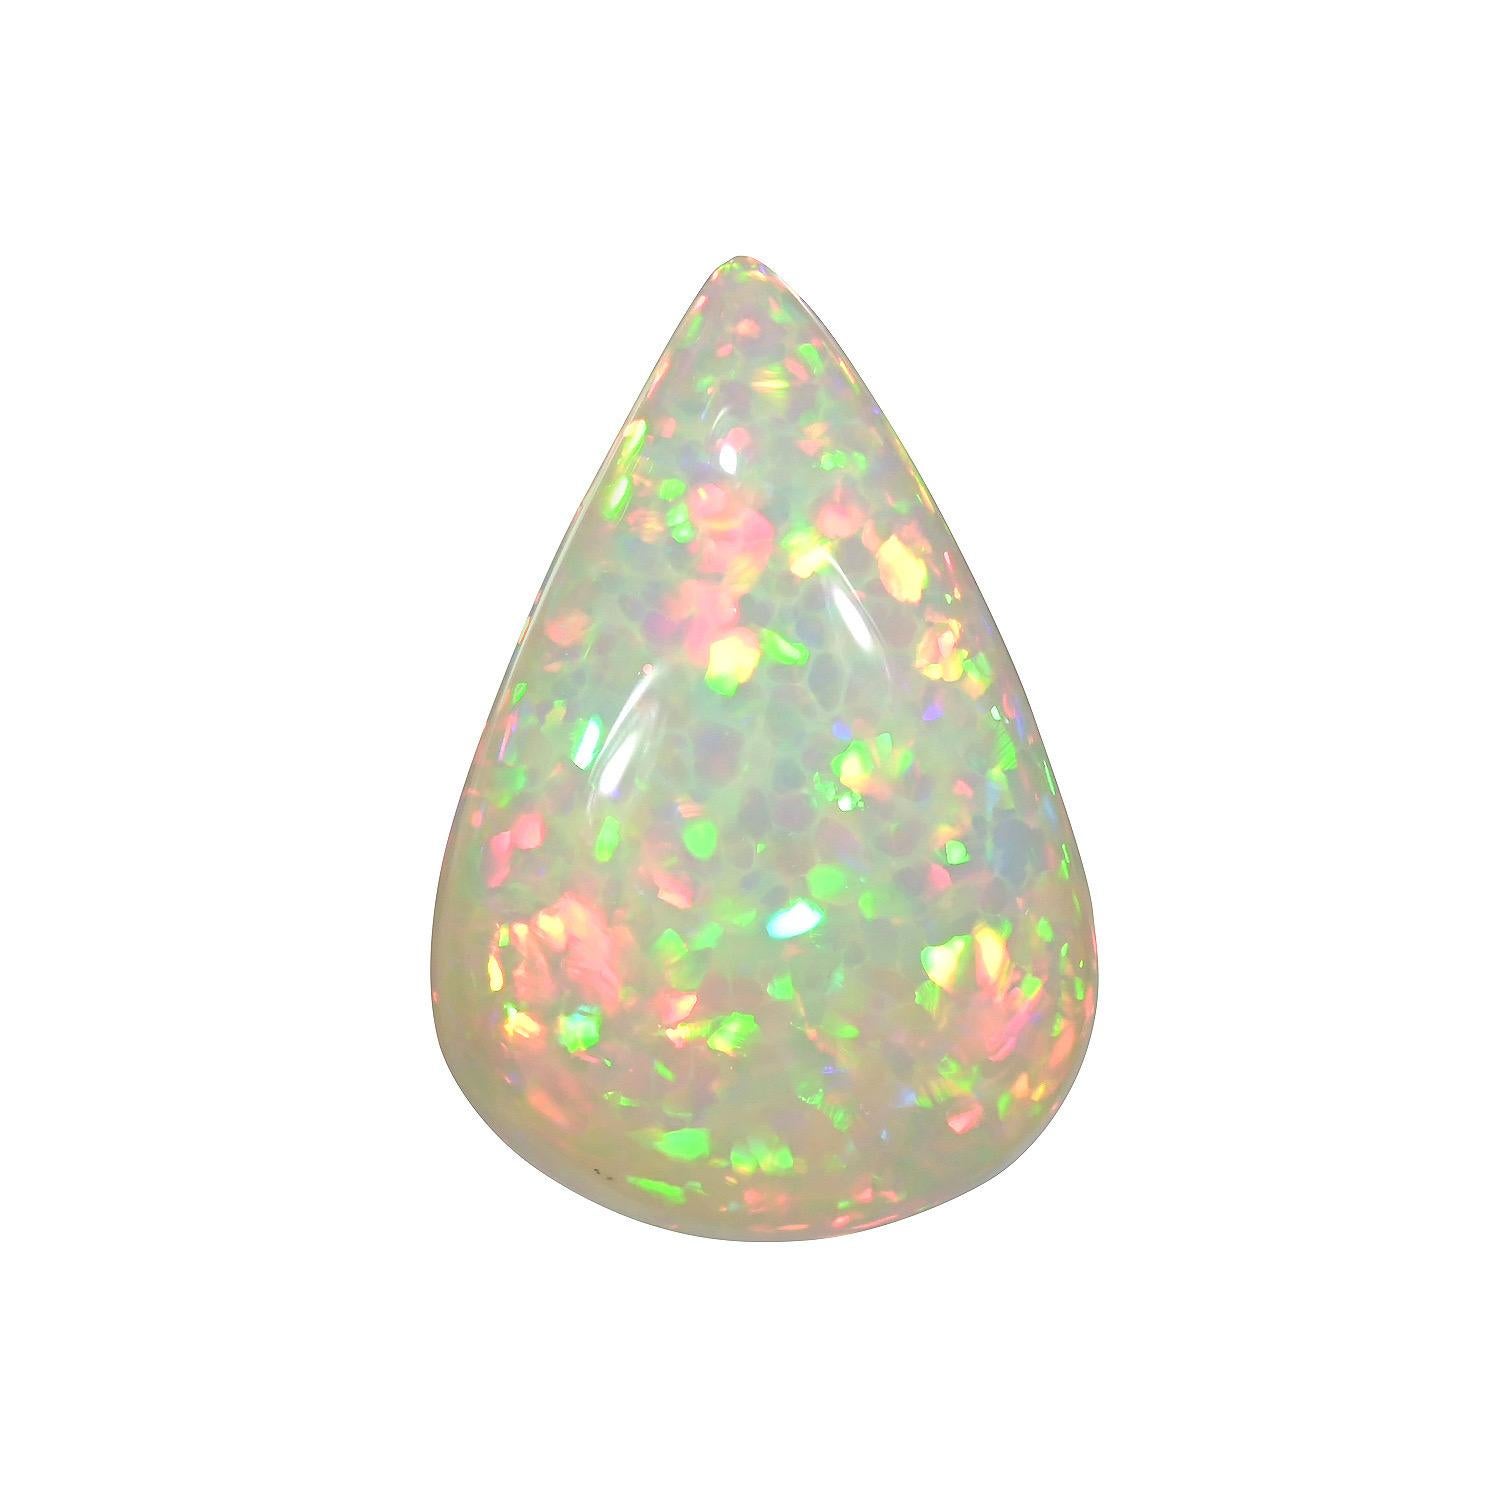 Natural 10.37 carat pear shape Ethiopian Opal loose gemstone, offered unmounted to a unique gem lover.
Returns are accepted and paid by us within 7 days of delivery.
We offer supreme custom jewelry work upon request. Please contact us for more